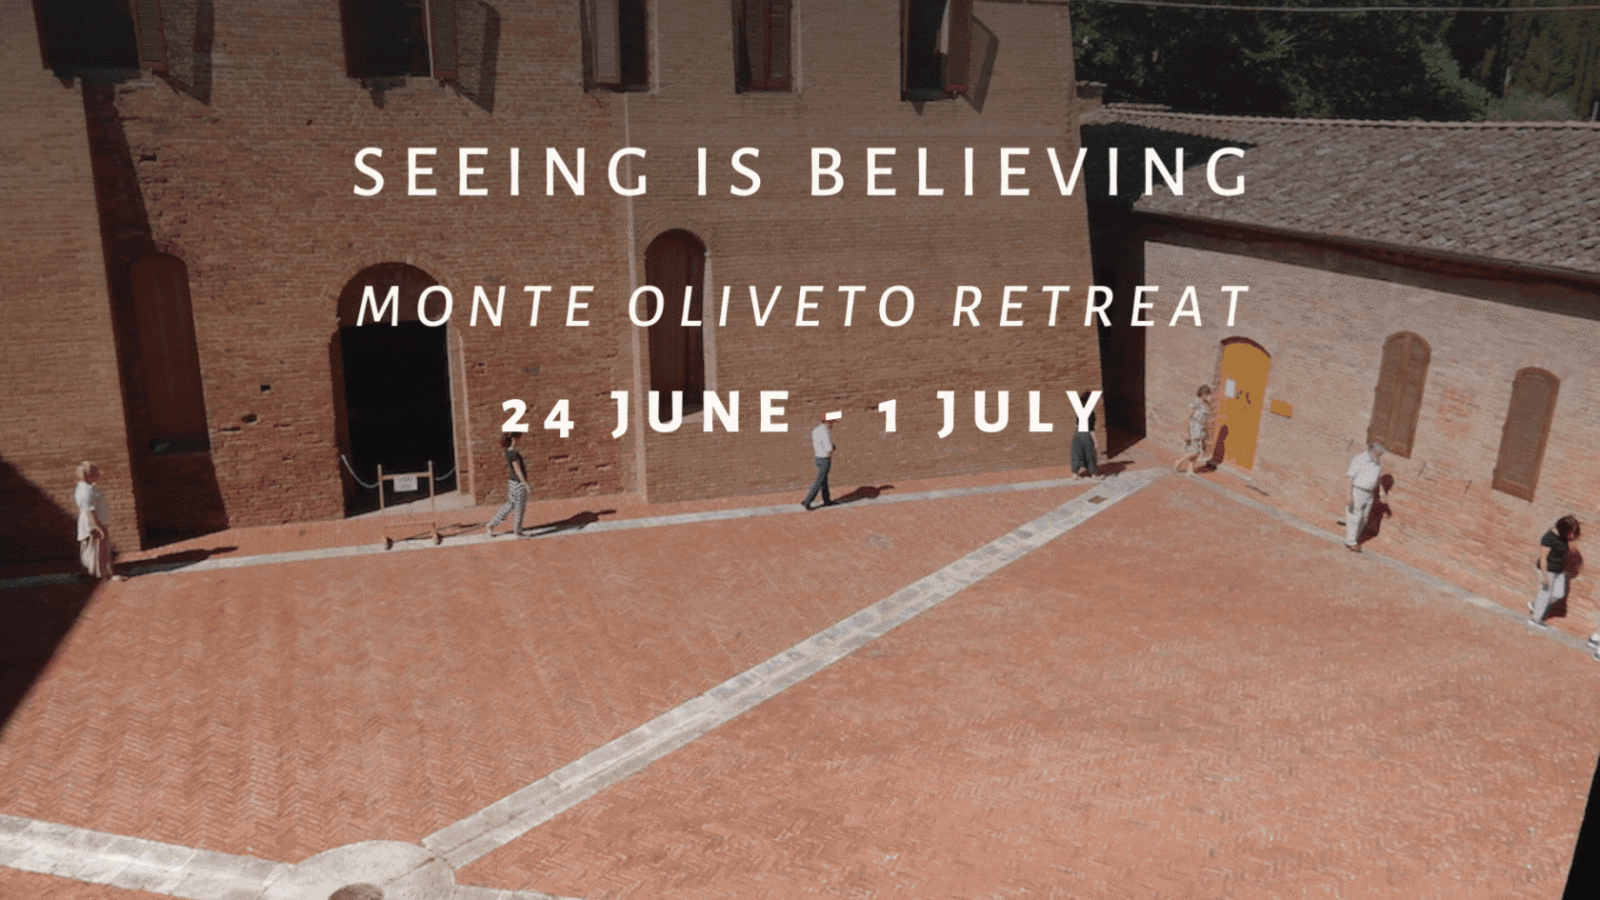 WCCM Monte Oliveto Retreat 2023, Seeing is Believing